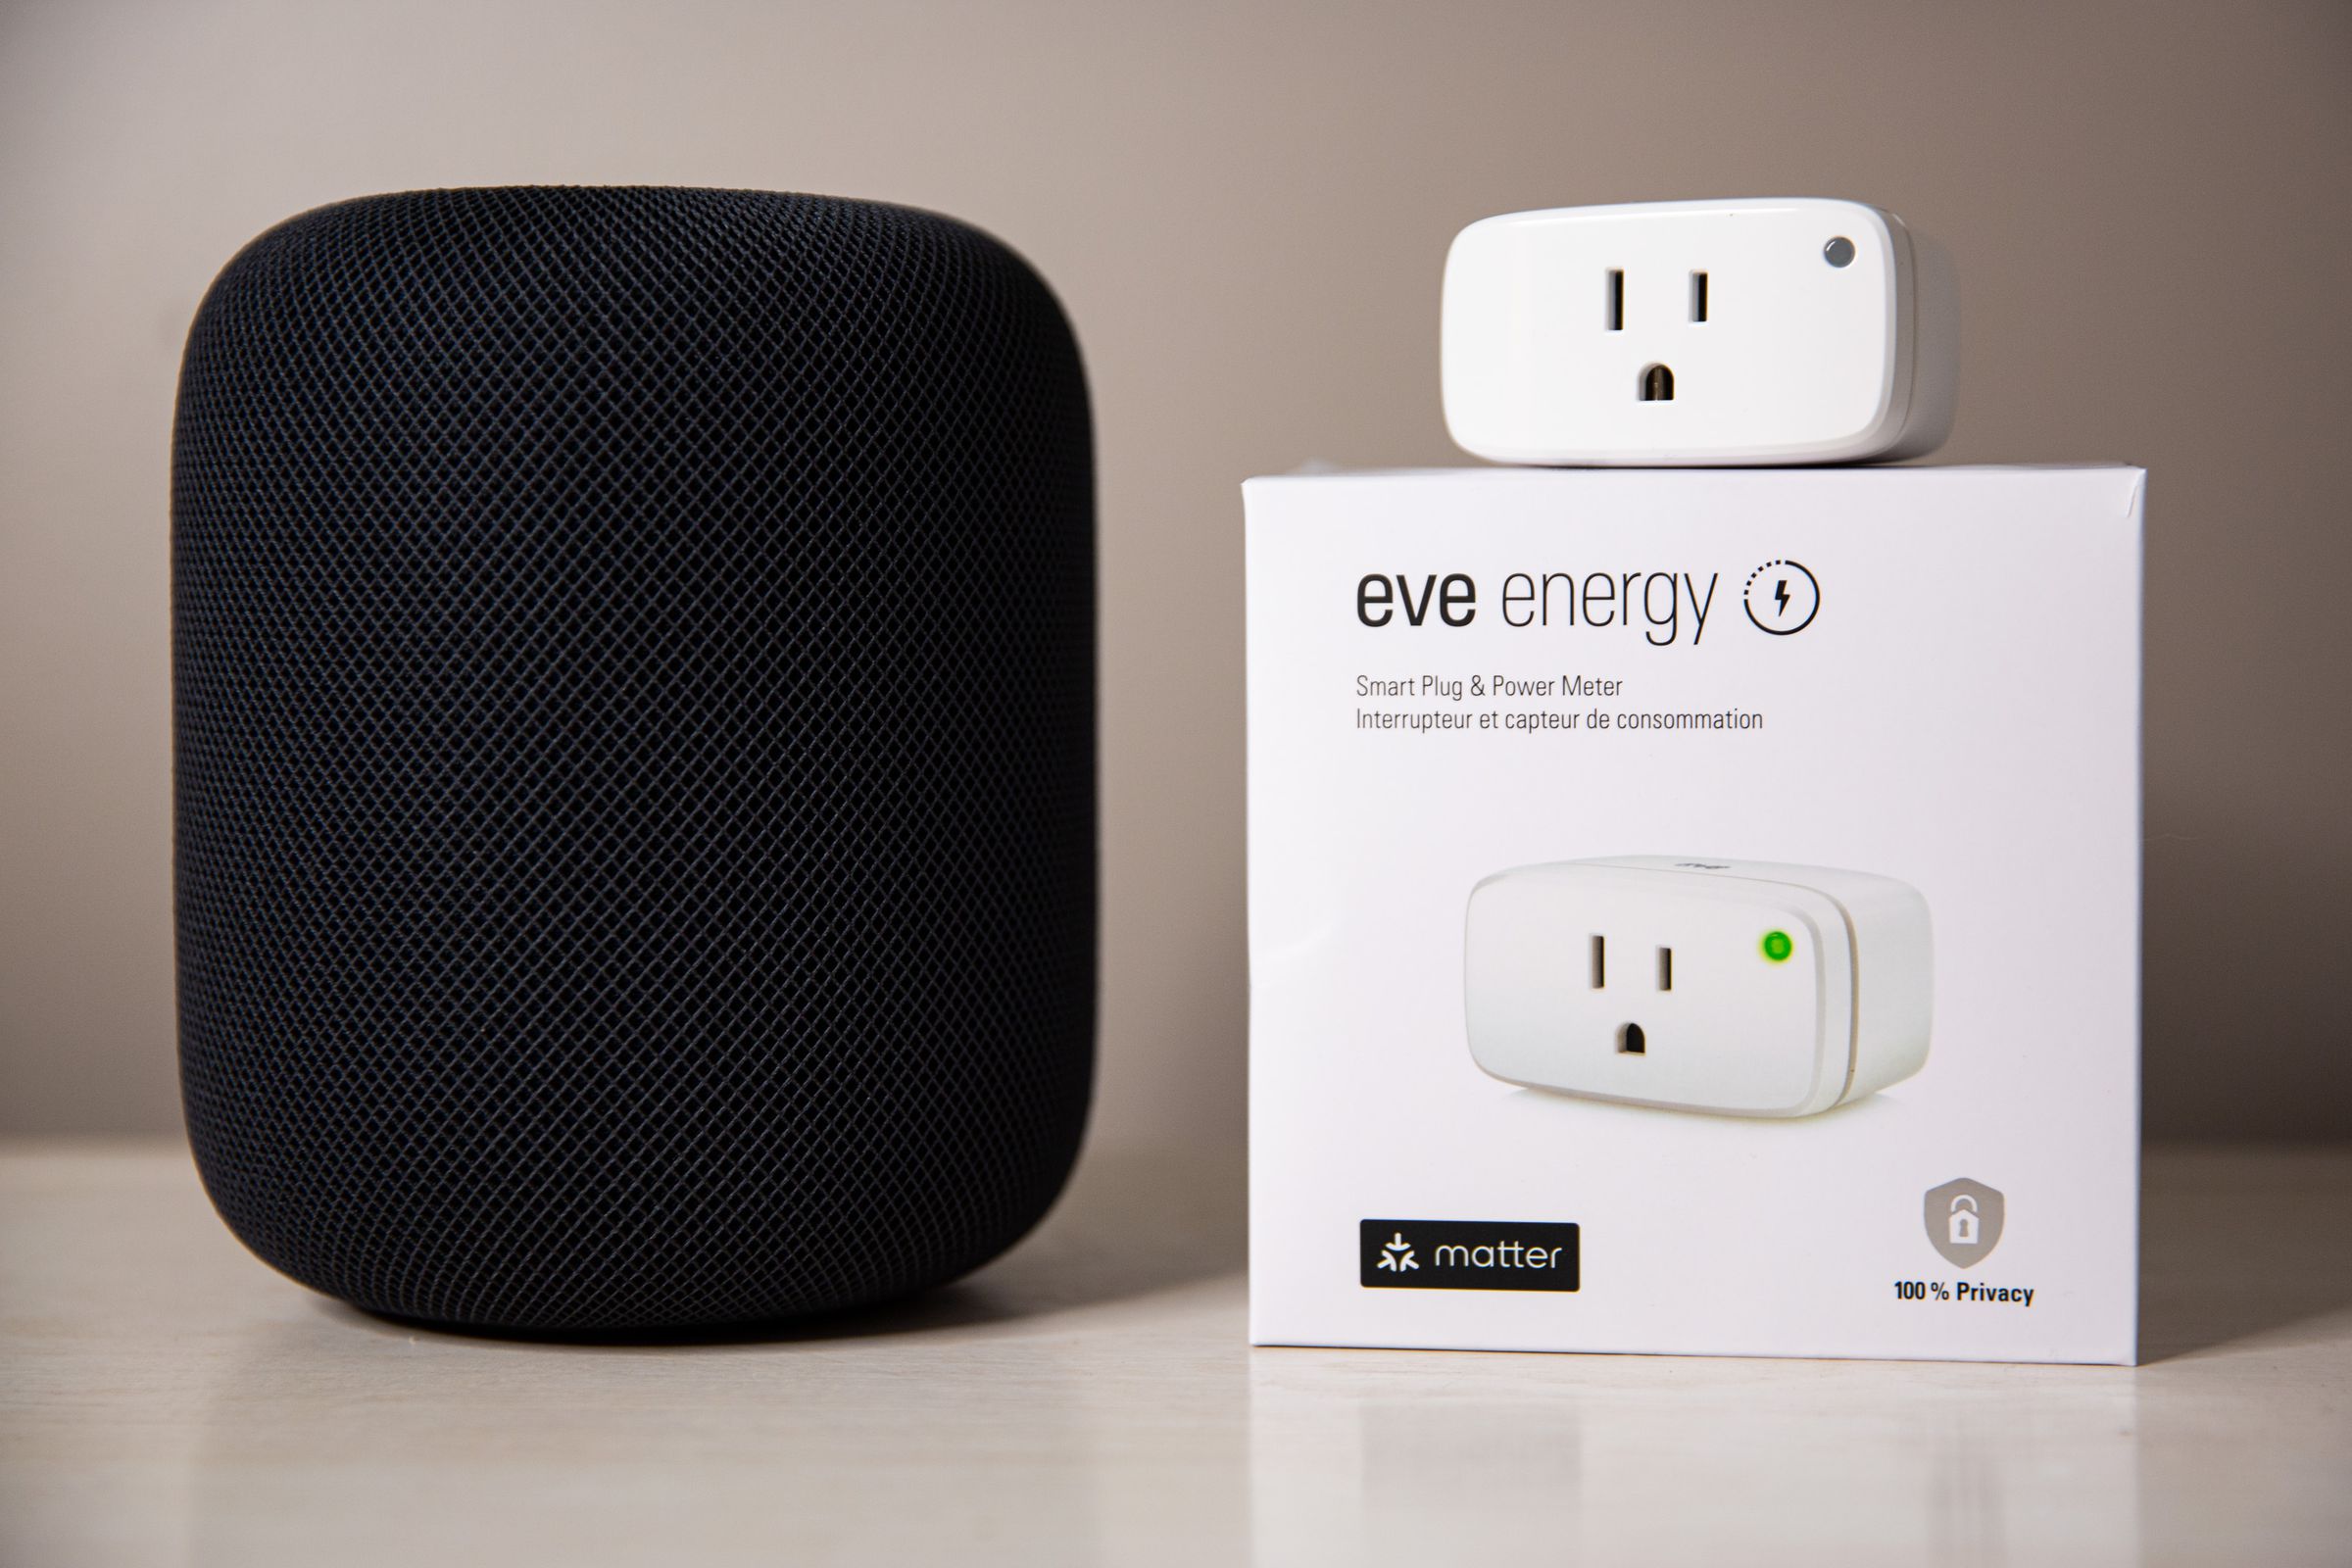 The HomePod is now a Thread border router, as well as a Matter controller, meaning it can control Thread and Matter accessories like this Eve Energy Smart Plug. 